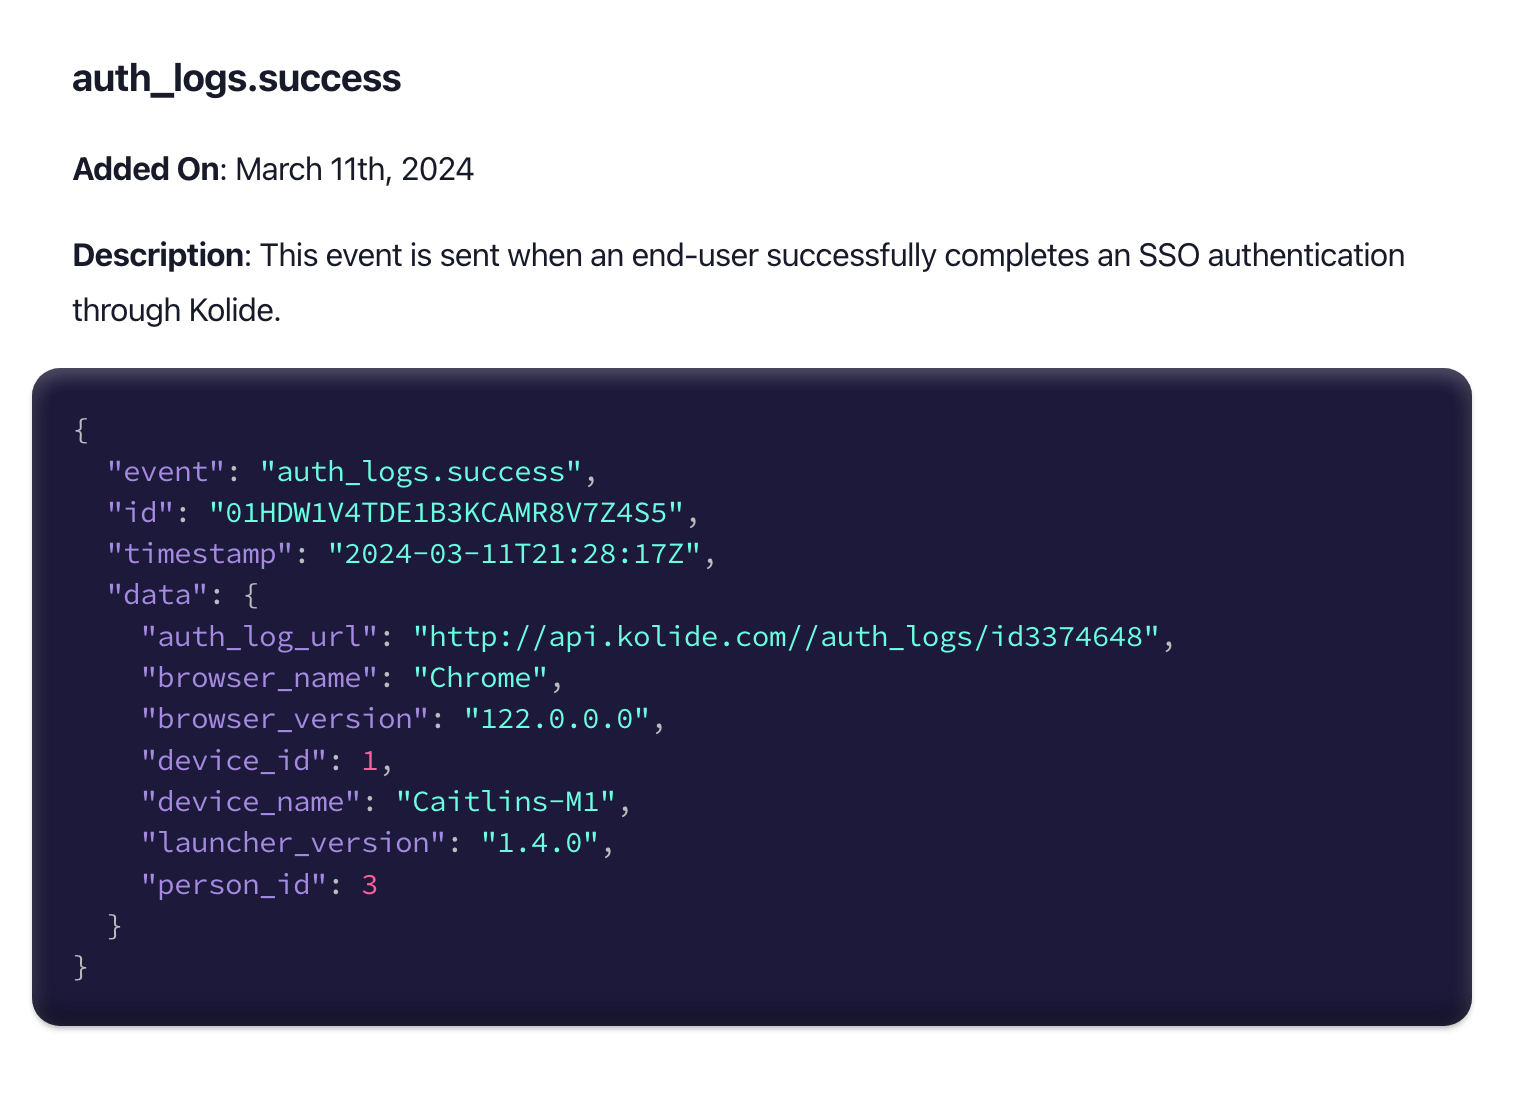 An image showing a screenshot of our auth_log_success webhook documentation